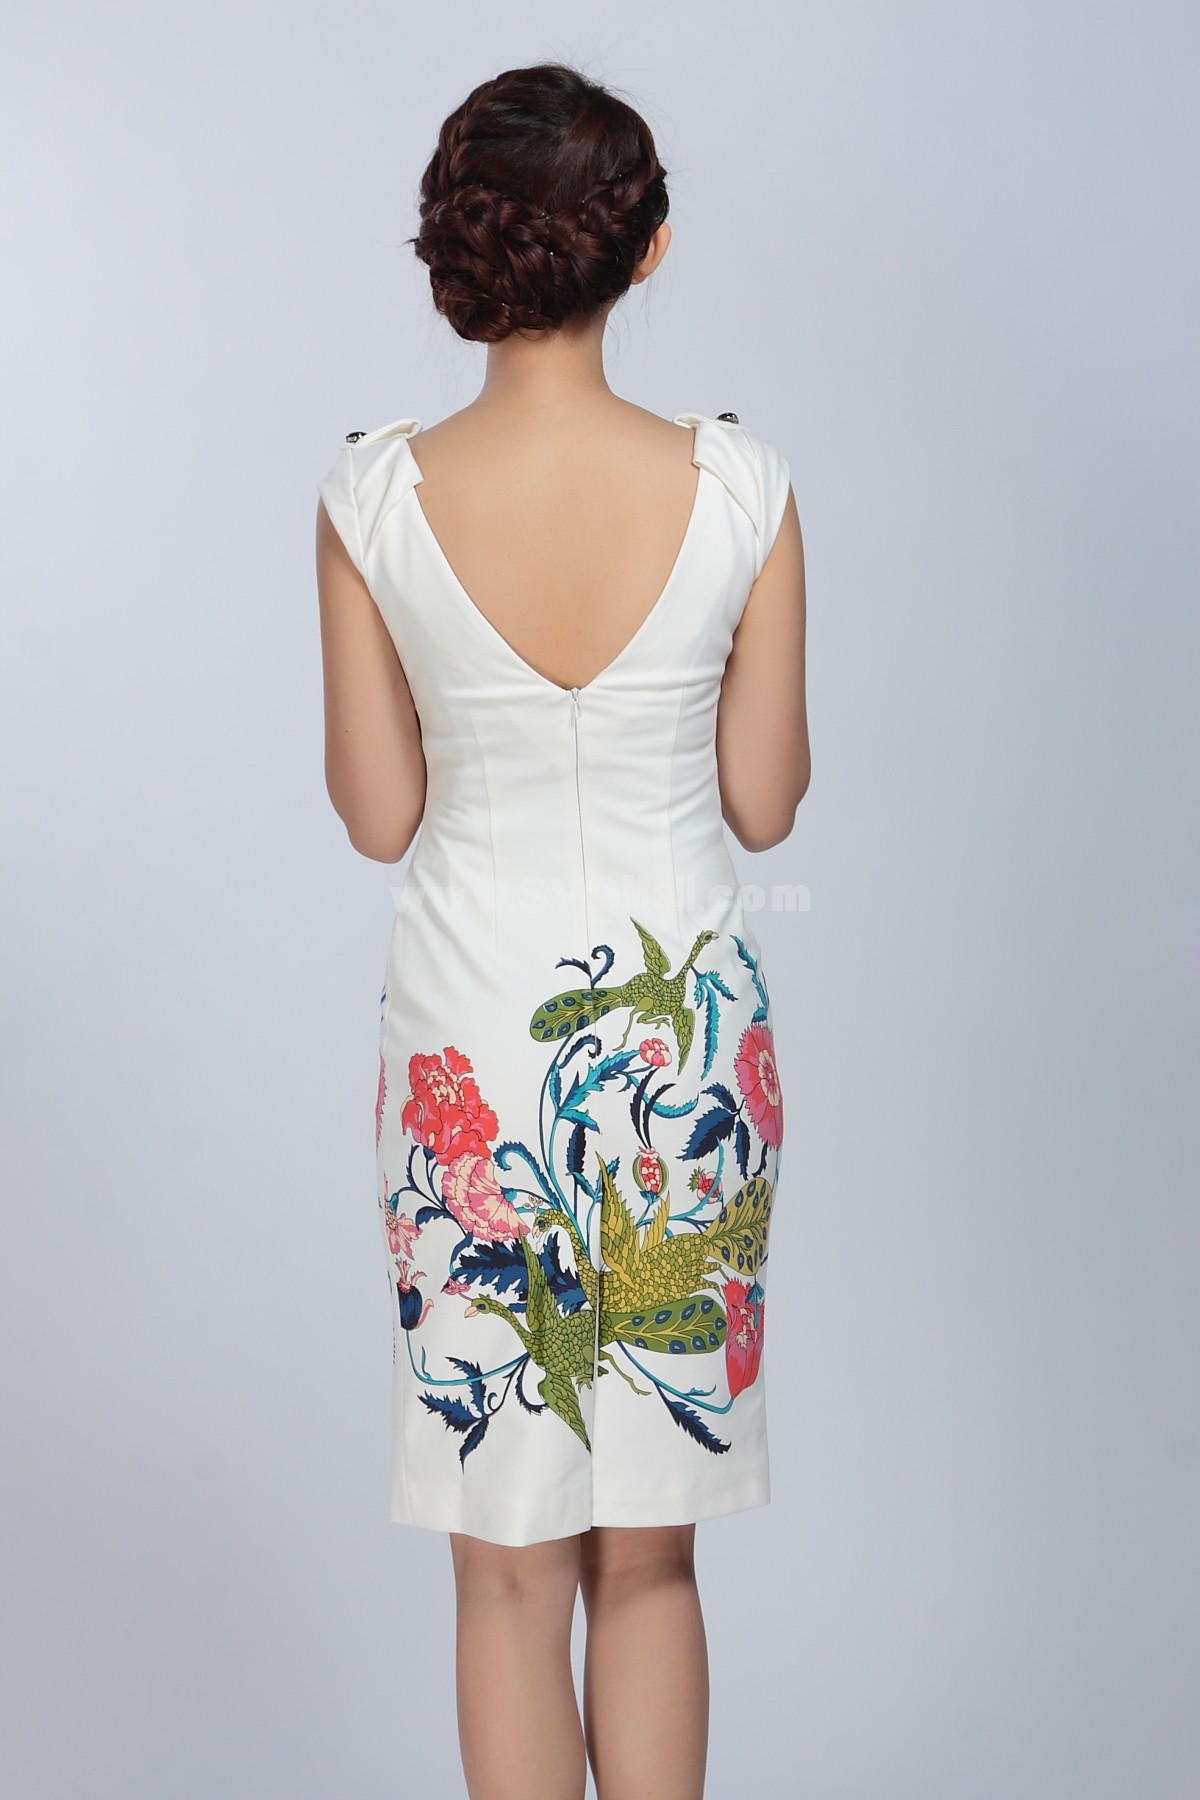 AS New Arrival Chinese Style Printing Slim Dress Evening Dress DR106